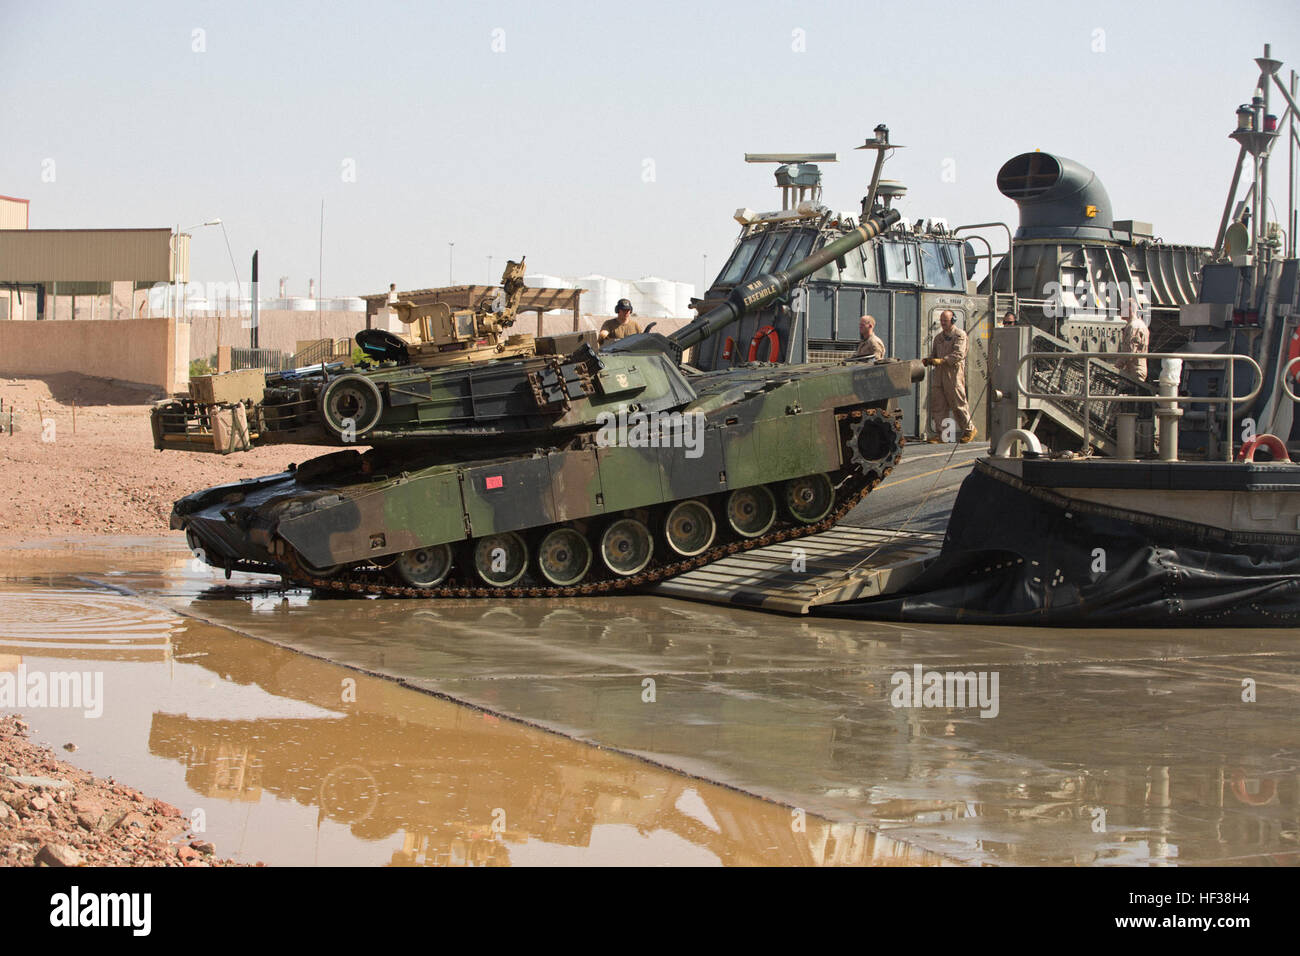 A U.S. Marine Corps M1A1 Abrams tank with the 24th Marine Expeditionary Unit debarks a U.S. Navy landing craft, air cushion hovercraft in support of Exercise Eager Lion 2015 at the Port of Aqaba in Jordan, April 28. EAGER LION is an annual, multinational exercise intended to share military expertise and promote interoperability. (U.S. Marine Corps photo by Cpl. Sean Searfus CE MARFOR CENTCOM FWD COMCAM/ Released) EAGER LION 2015, LCACs Arrive at Aqaba 150428-M-VH365-181 Stock Photo